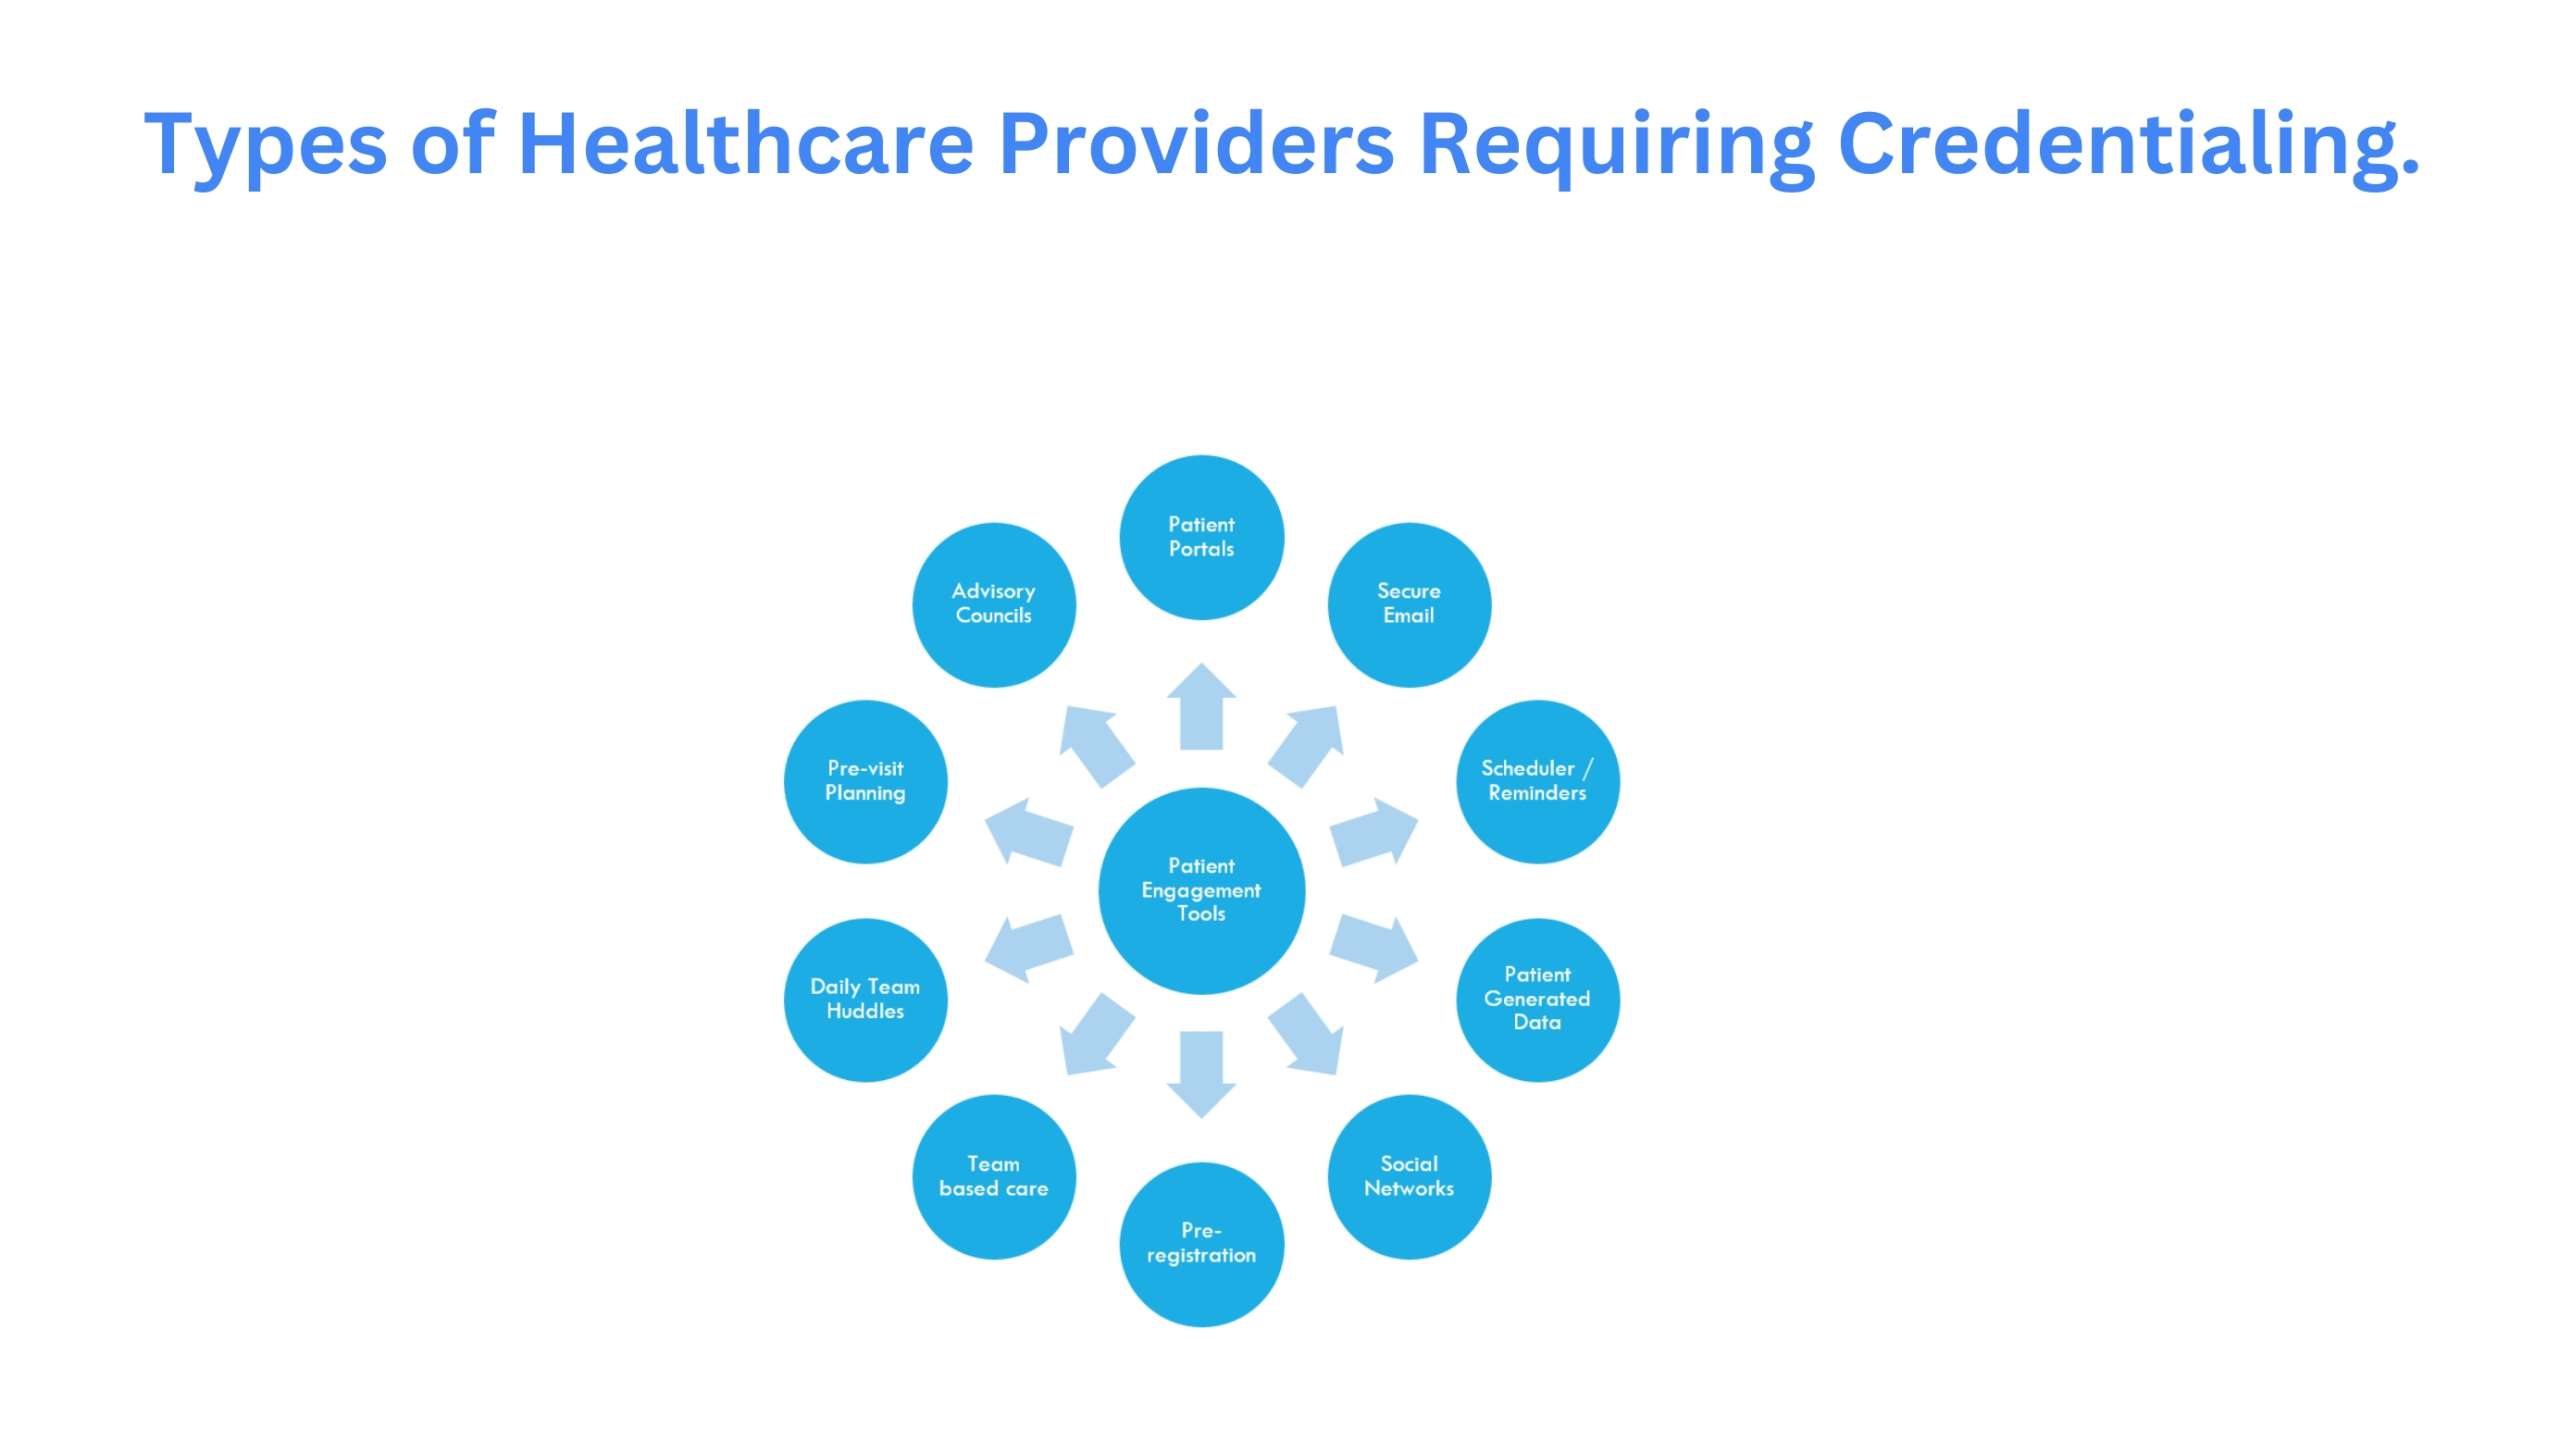 Types of Healthcare Providers Requiring Credentialing.